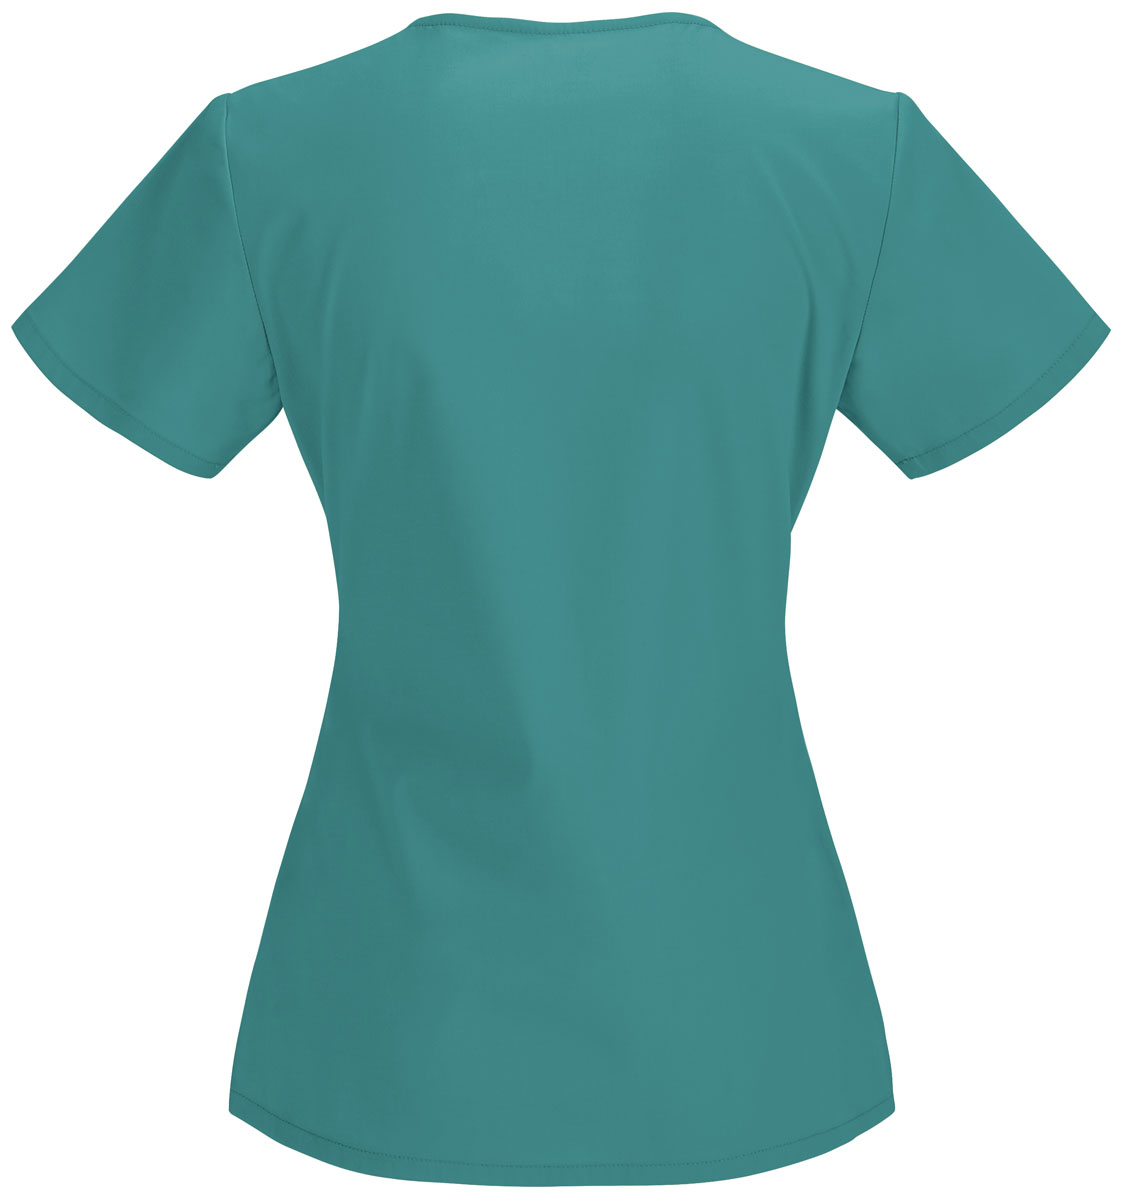 Bliss V-Neck Top in Teal 46607A-TLCH from Cherokee Scrubs at Cherokee 4 ...